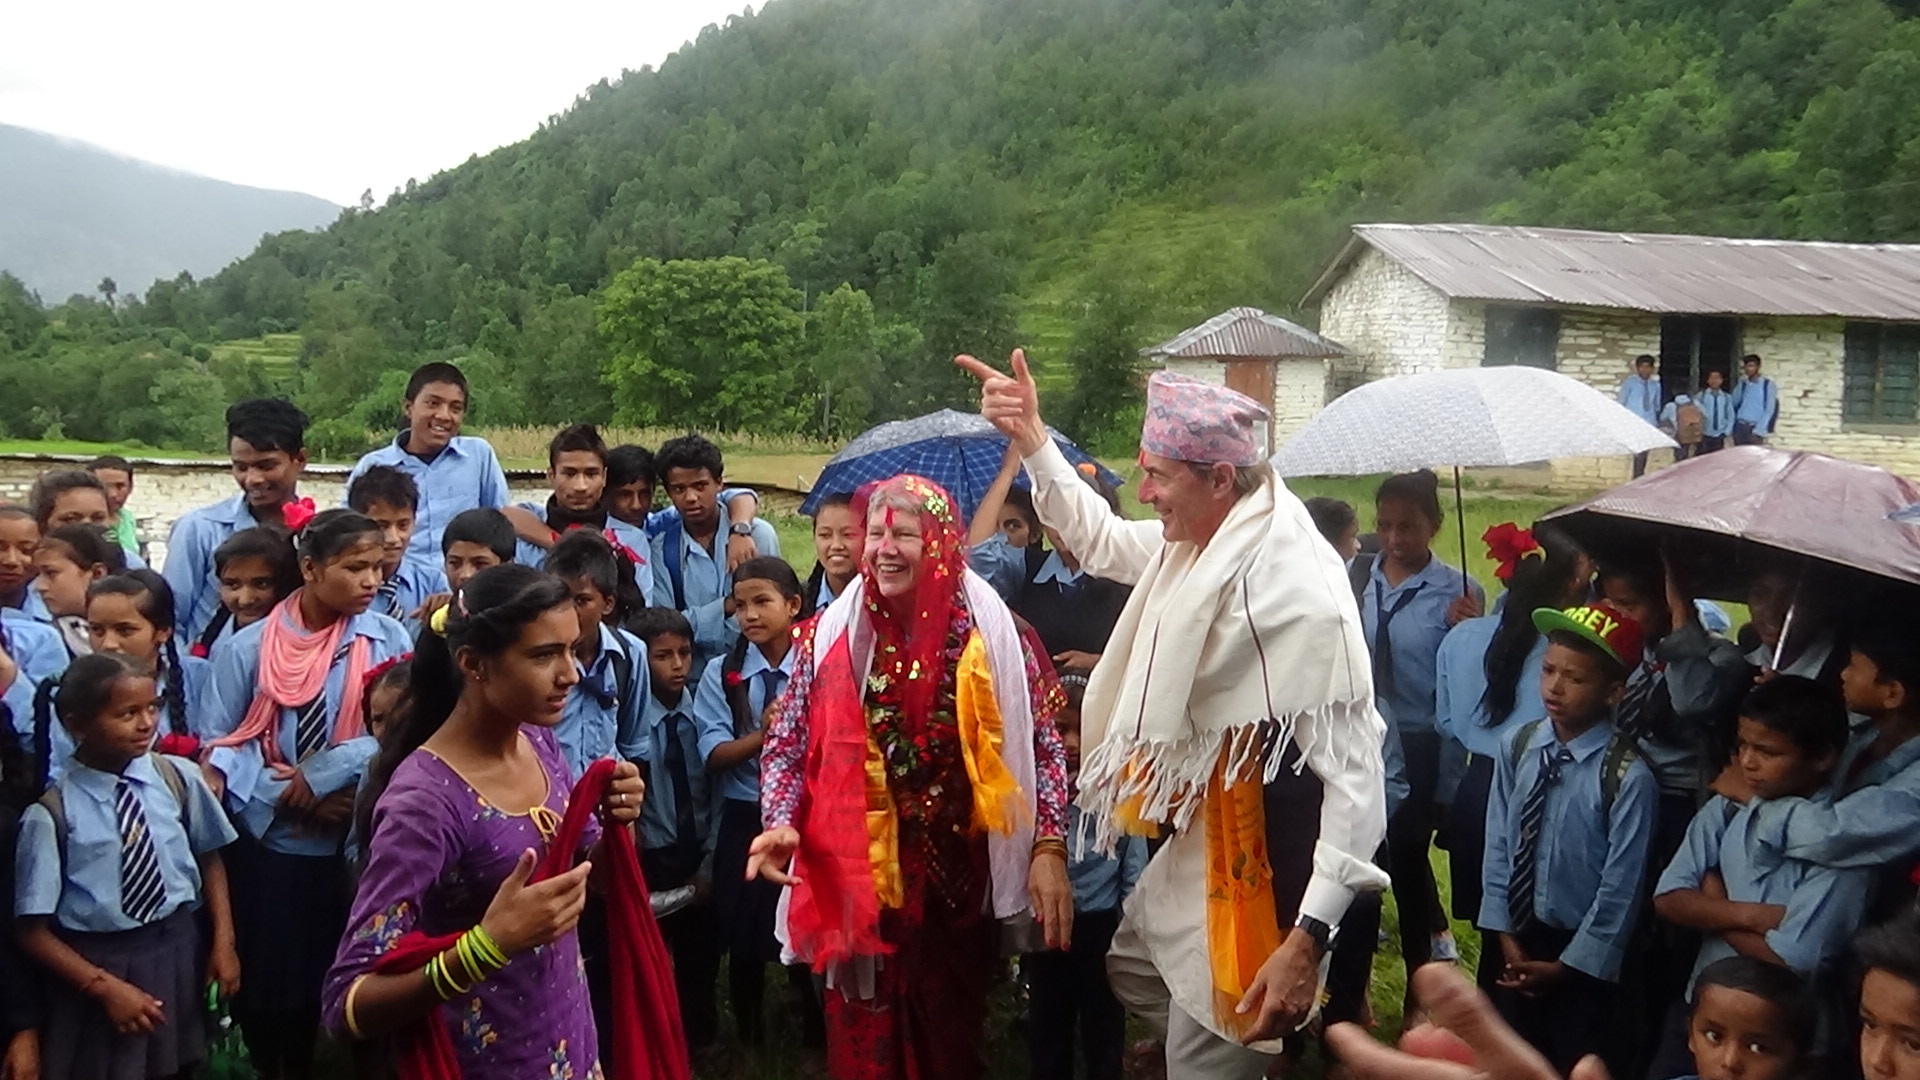 Nepalese village life cherishes every community niceties shared. Laureate Professor Roger Smith and Ms. Annie Smith celebrated their 47th marriage anniversary in the intervention village of rural Nepal.